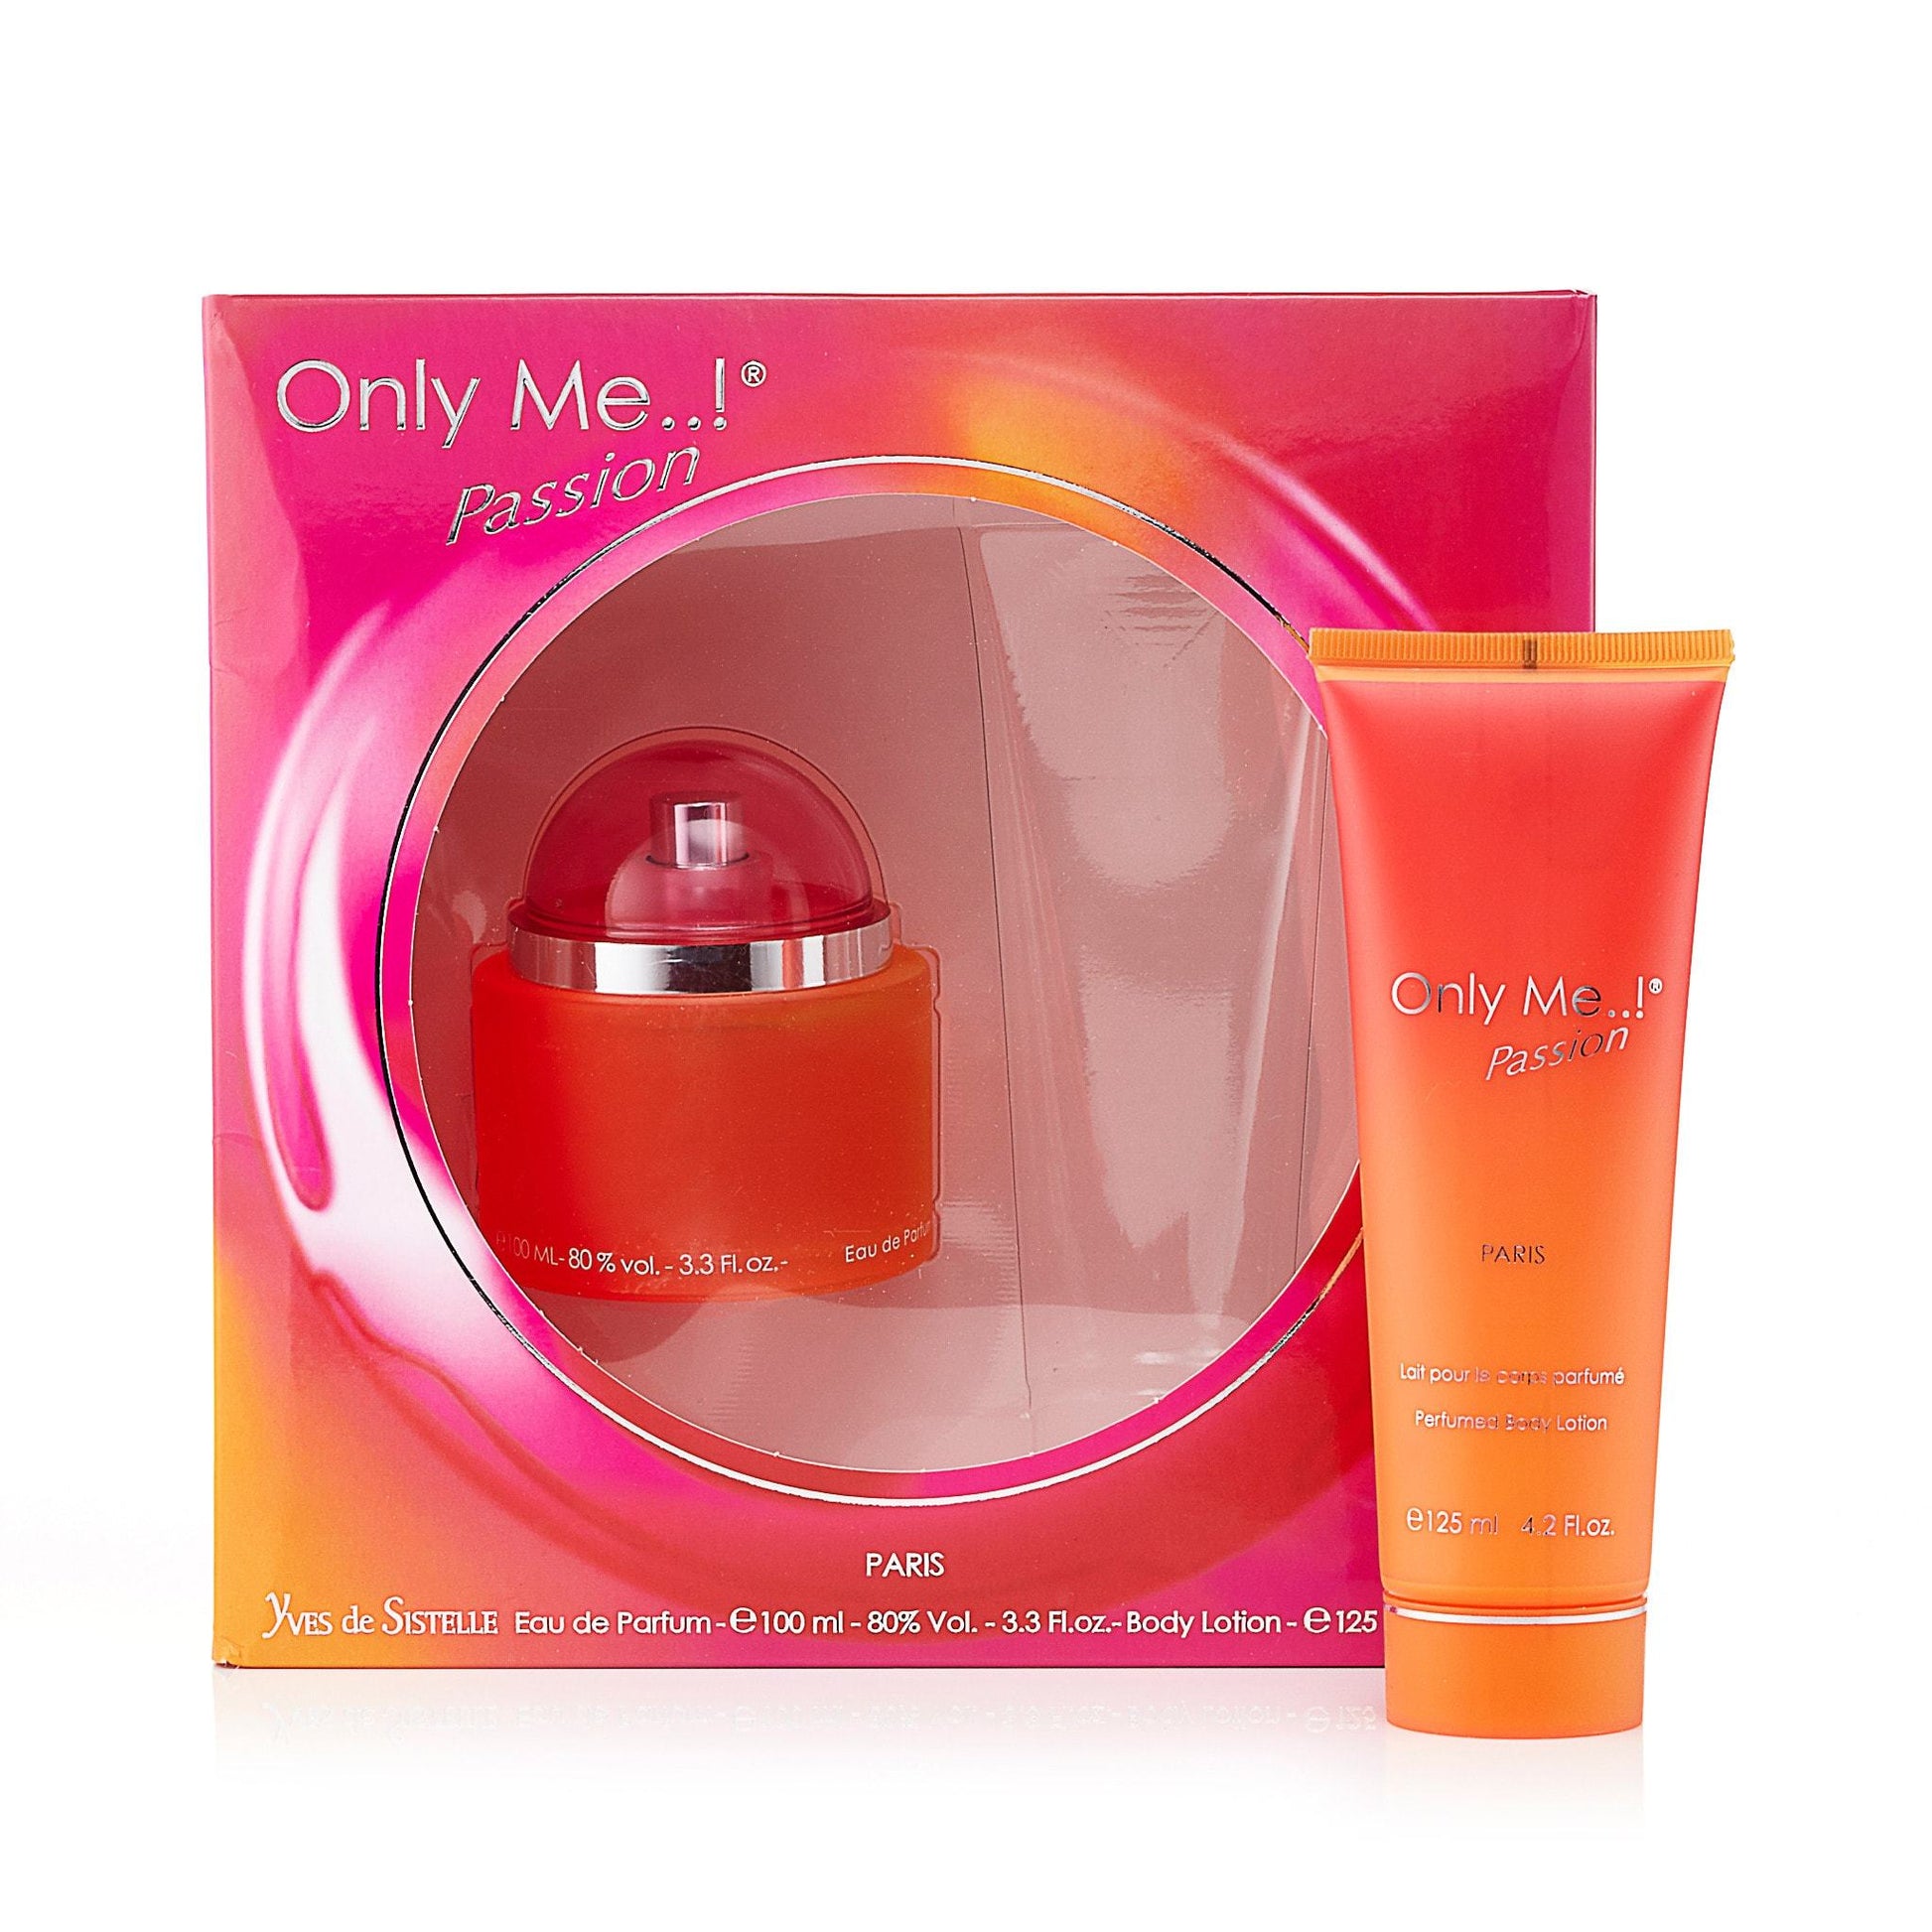 Only Me Passion Gift Set for Women, Product image 2